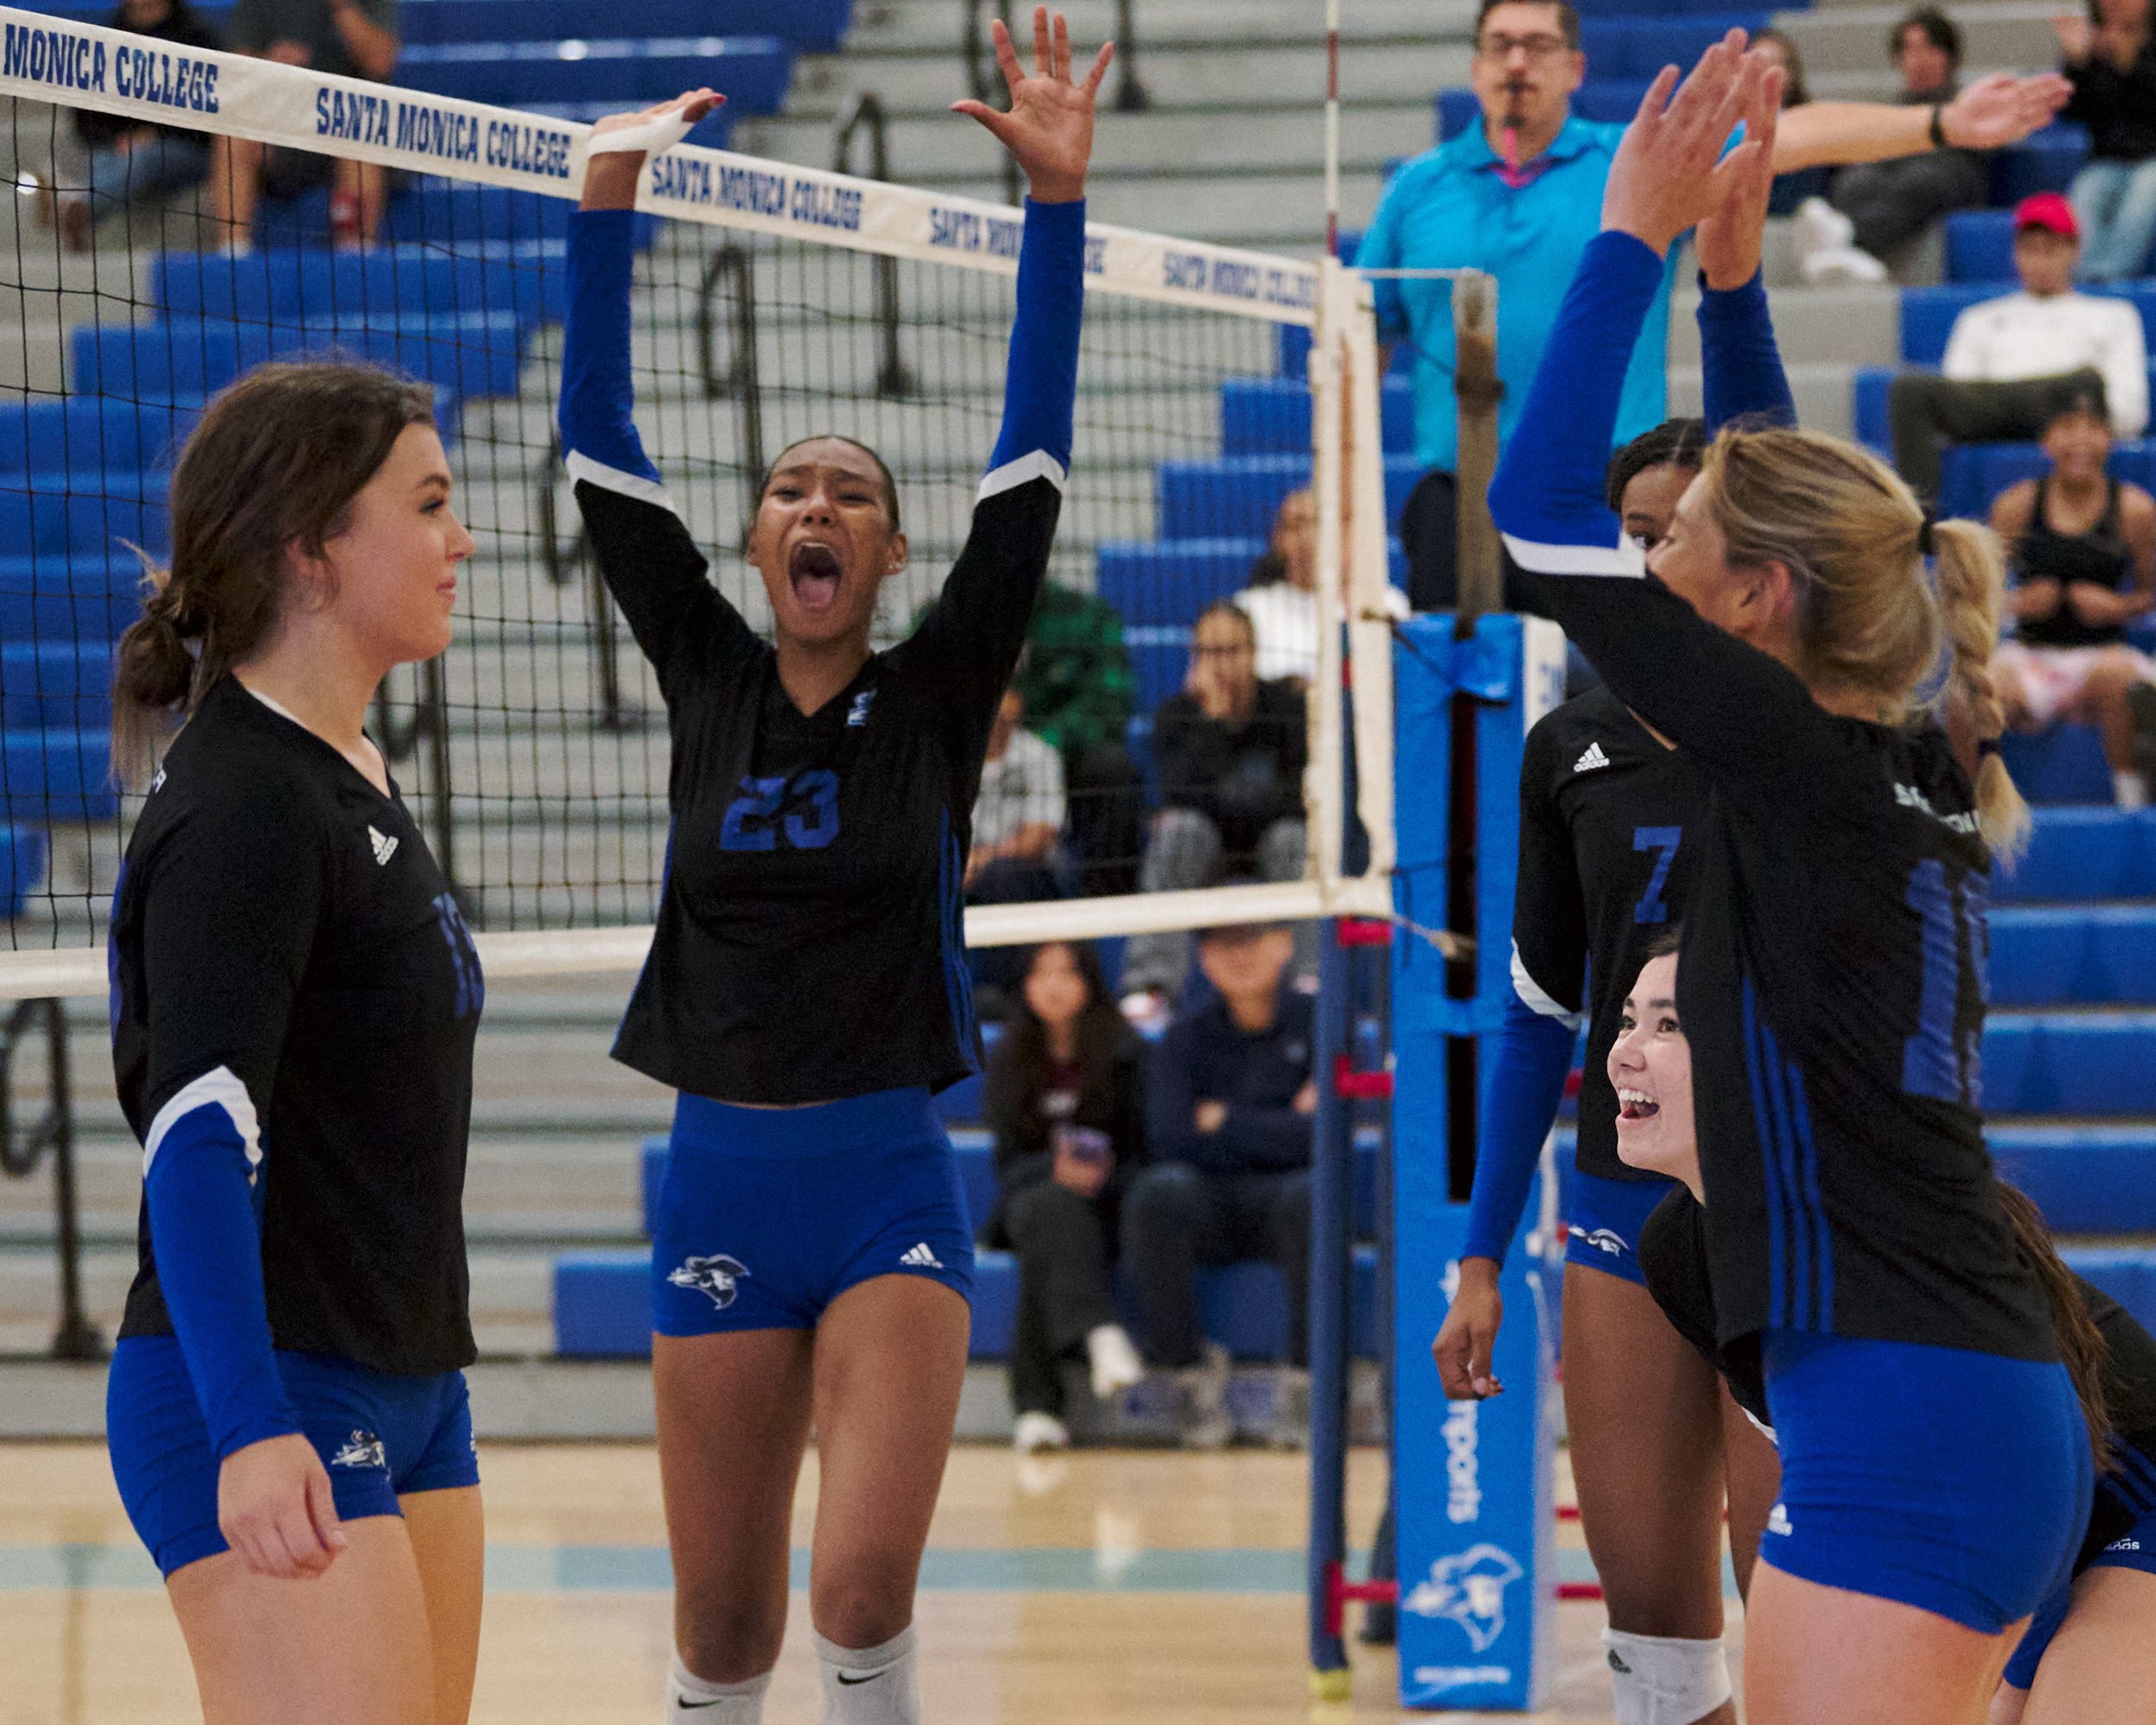  Santa Monica College Corsairs' Rain Martinez (center) and teammates celebrate after a kill by Mackenzie Wolff (left) during the women's volleyball game against the West Los Angeles College Wildcats on Wednesday, Oct. 26, 2022, at SMC Gym in Santa Mo